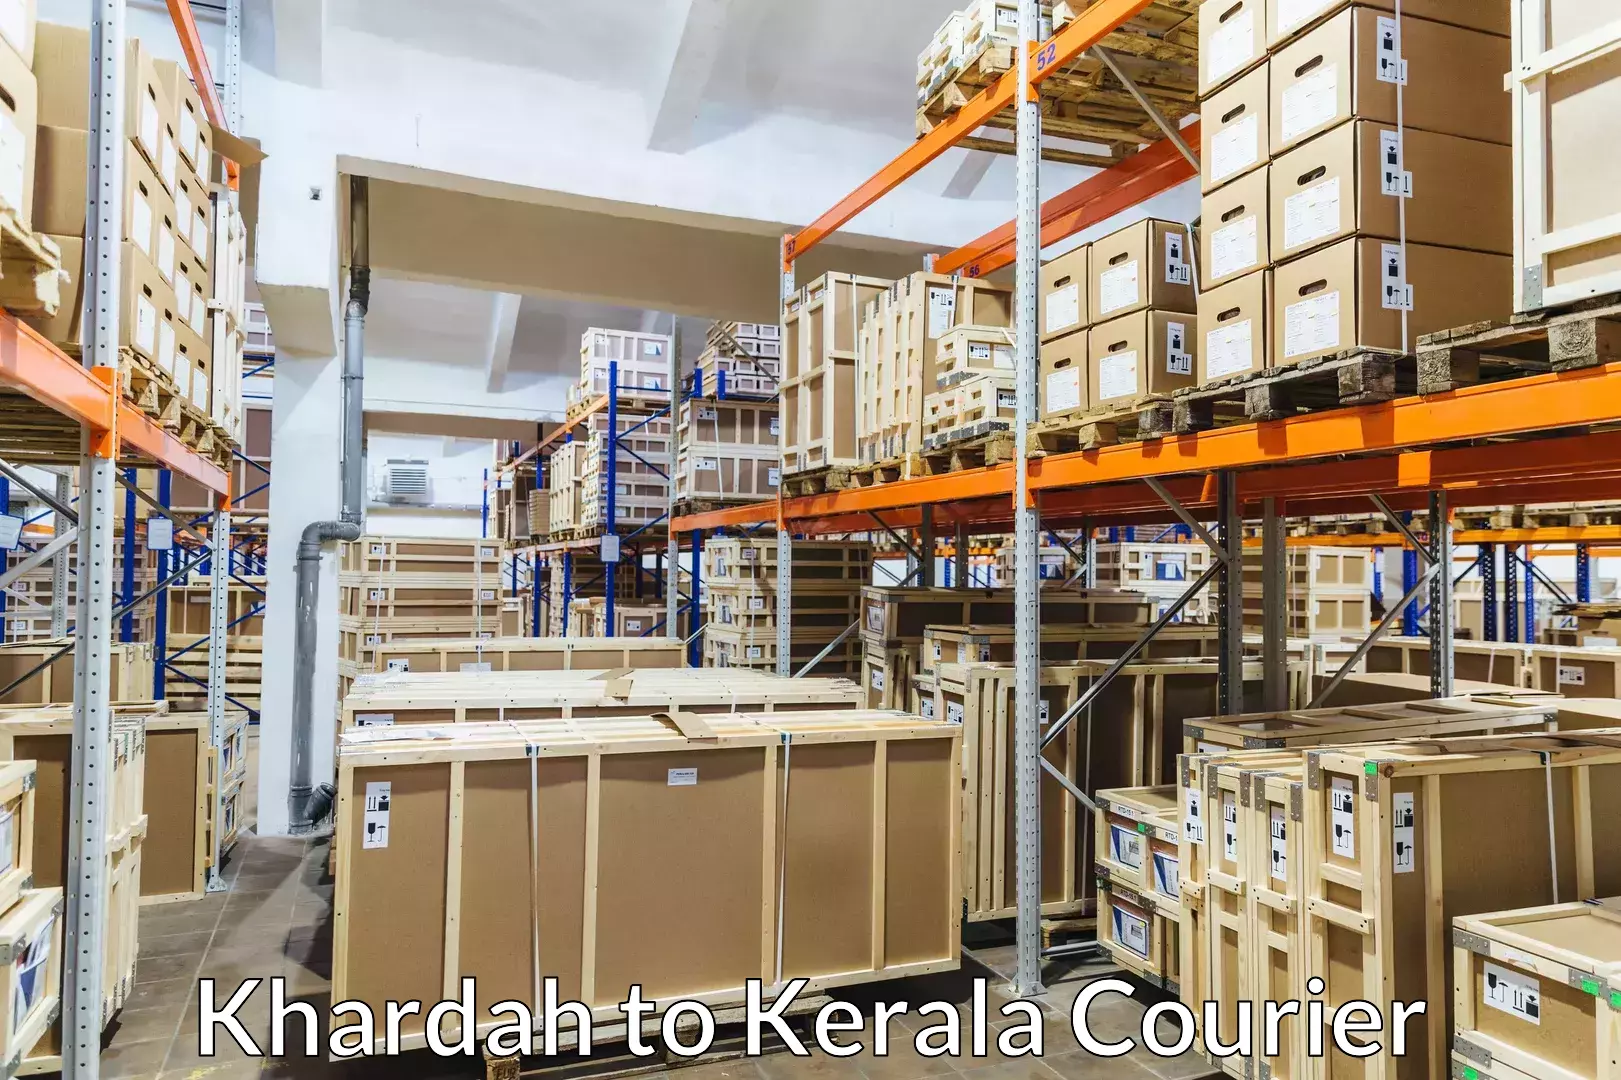 Luggage delivery network Khardah to Kochi